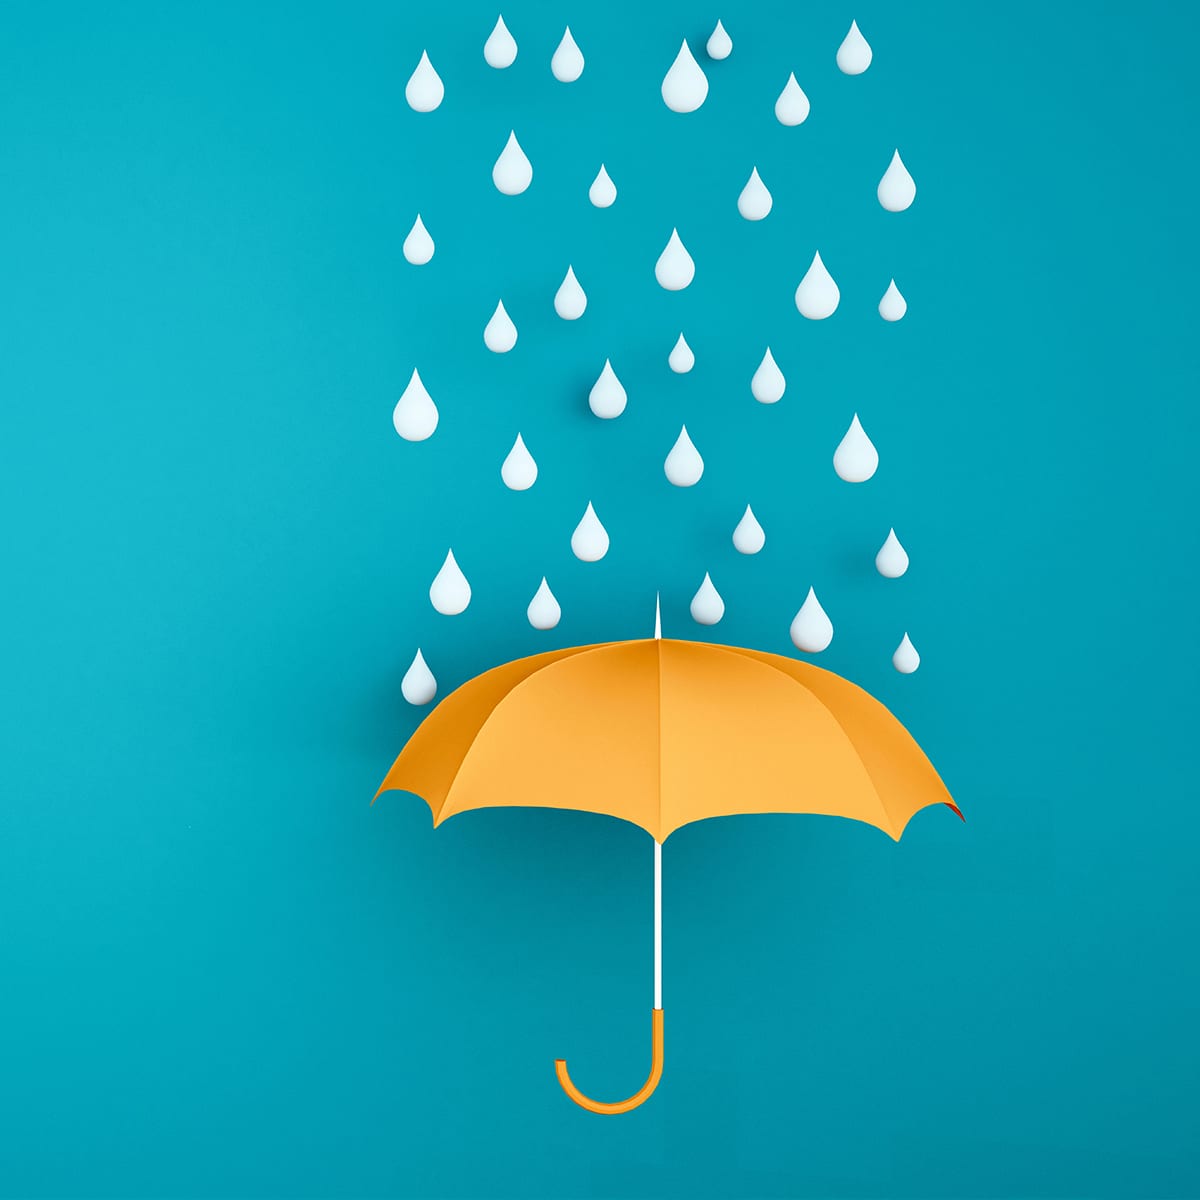 Orange umbrella with water drop on a blue backdrop - Rainy season for artwork - Orange umbrella with the weather in the rainy season - 3D Illustration